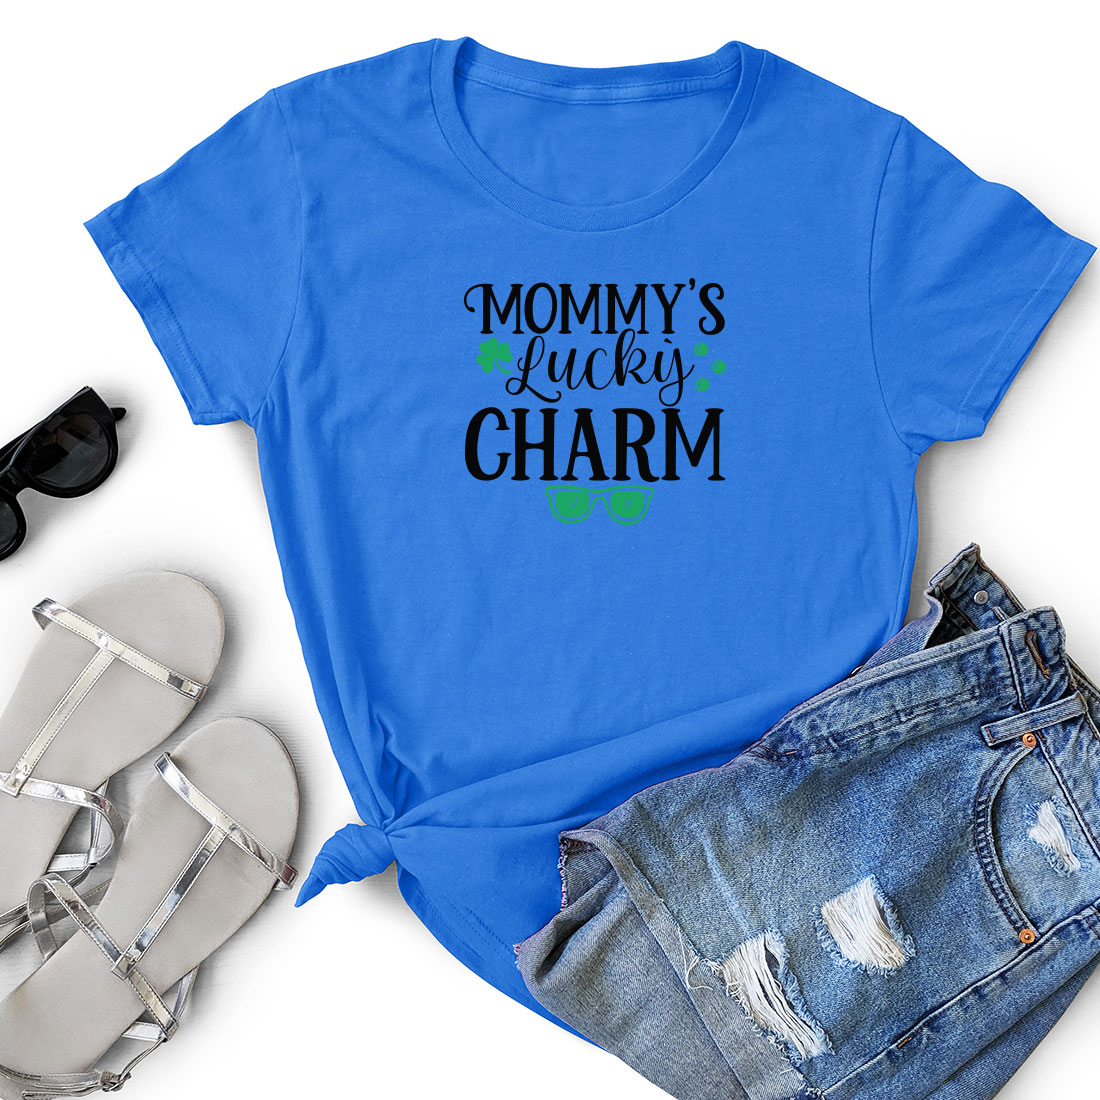 T - shirt that says mommy's lucky charm next to a pair of.